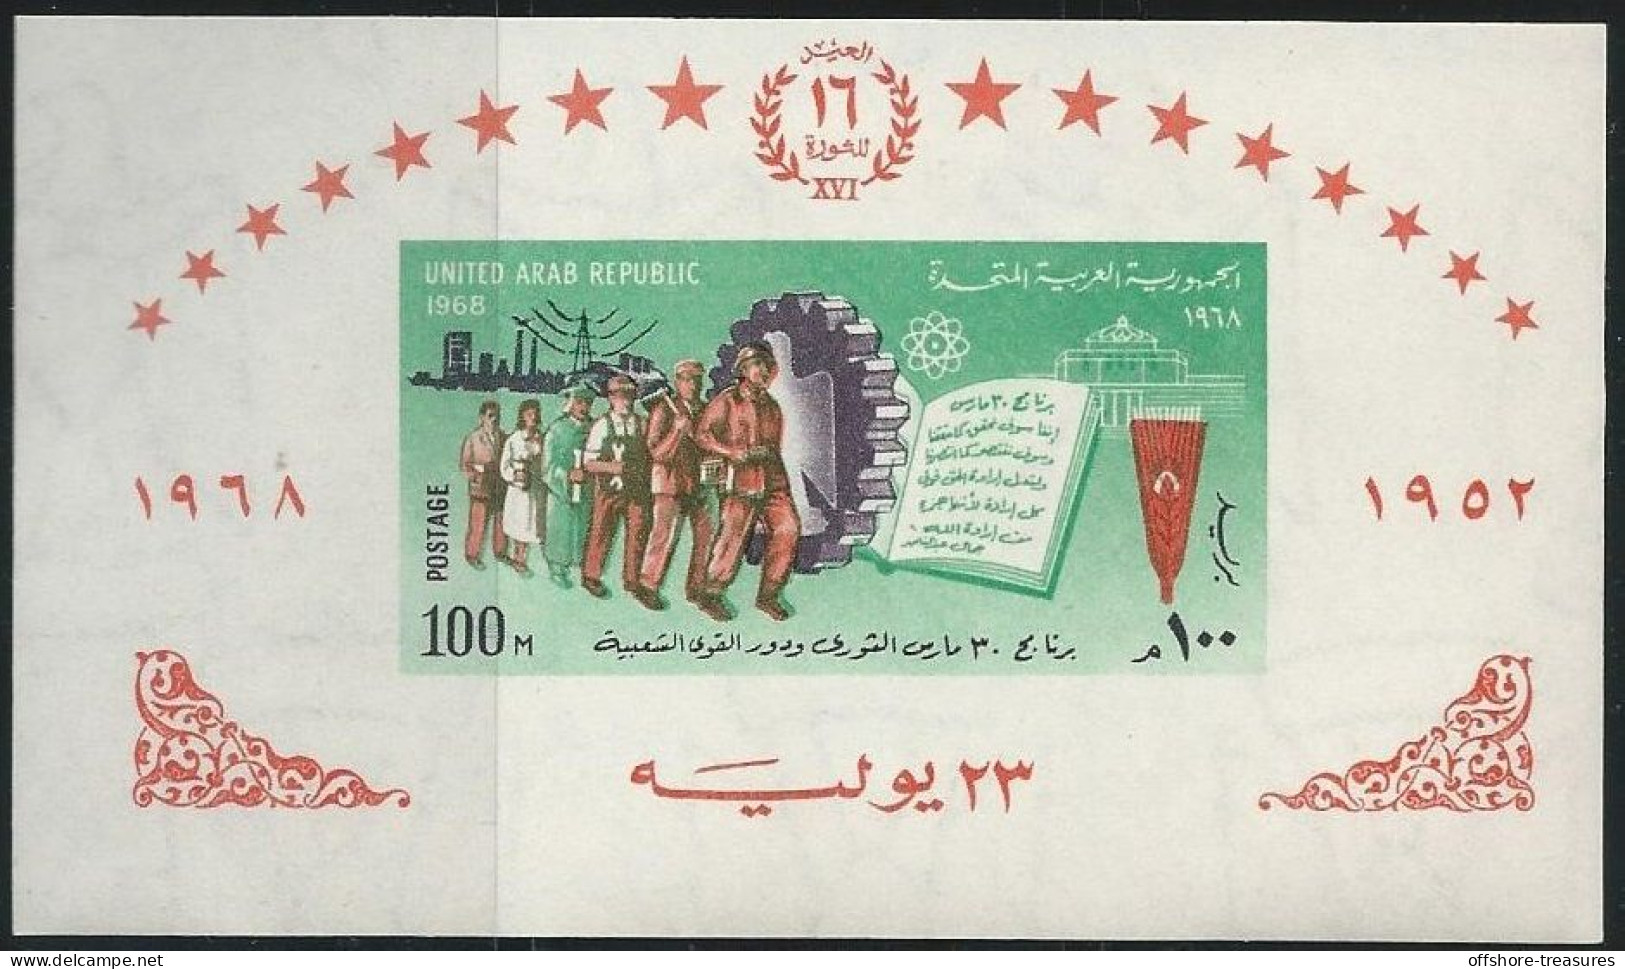 EGYPT 1952-1968 16th ANNIVERSARY OF REVOLUTION - Souvenir SHEET SG # MS954 - Covers & Documents